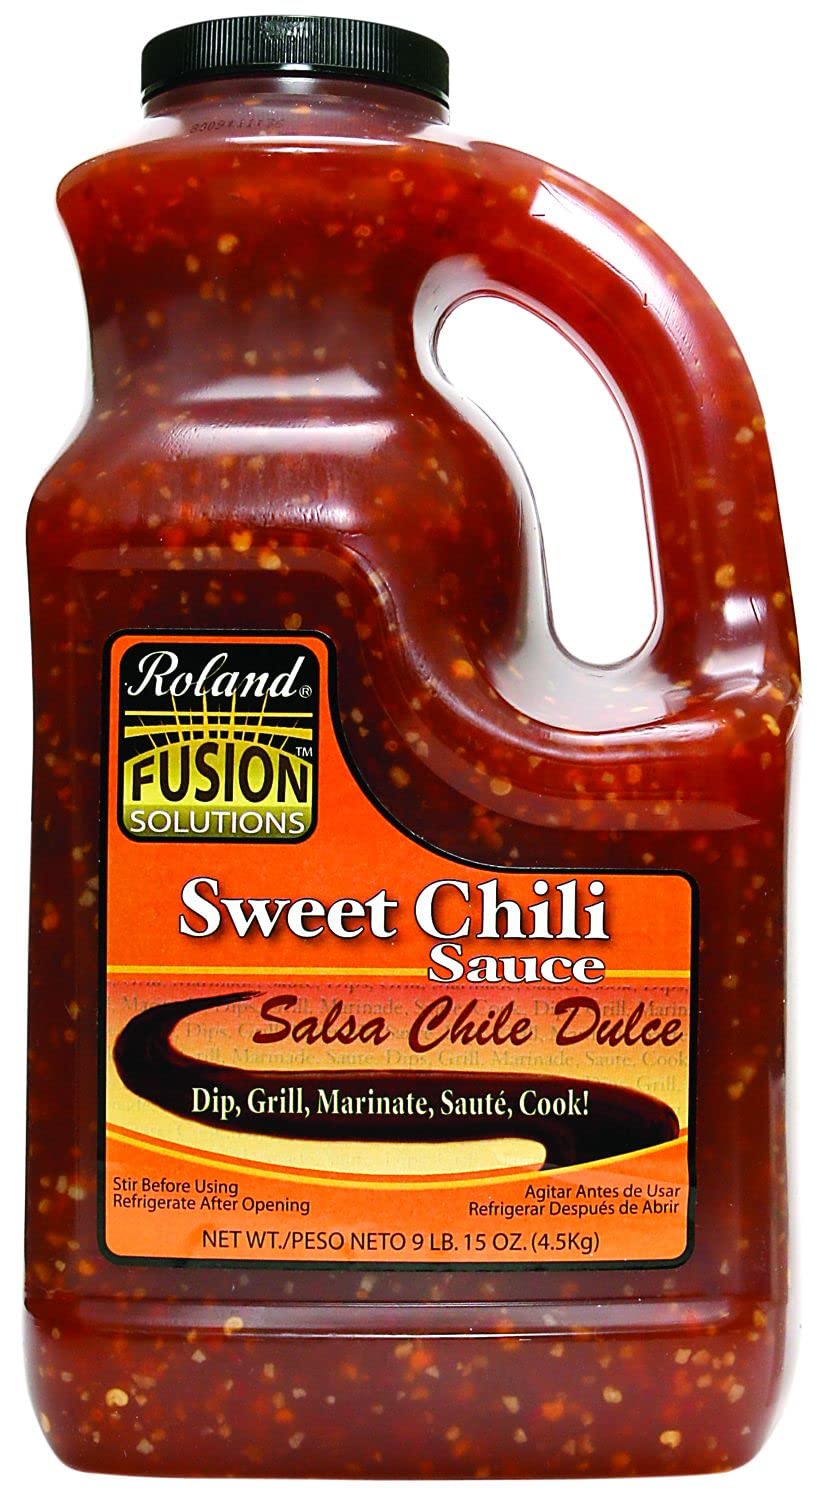 Roland Foods Fusion Solutions Sweet Chili Sauce, Specialty Imported Food, 1-Gallon Bottle